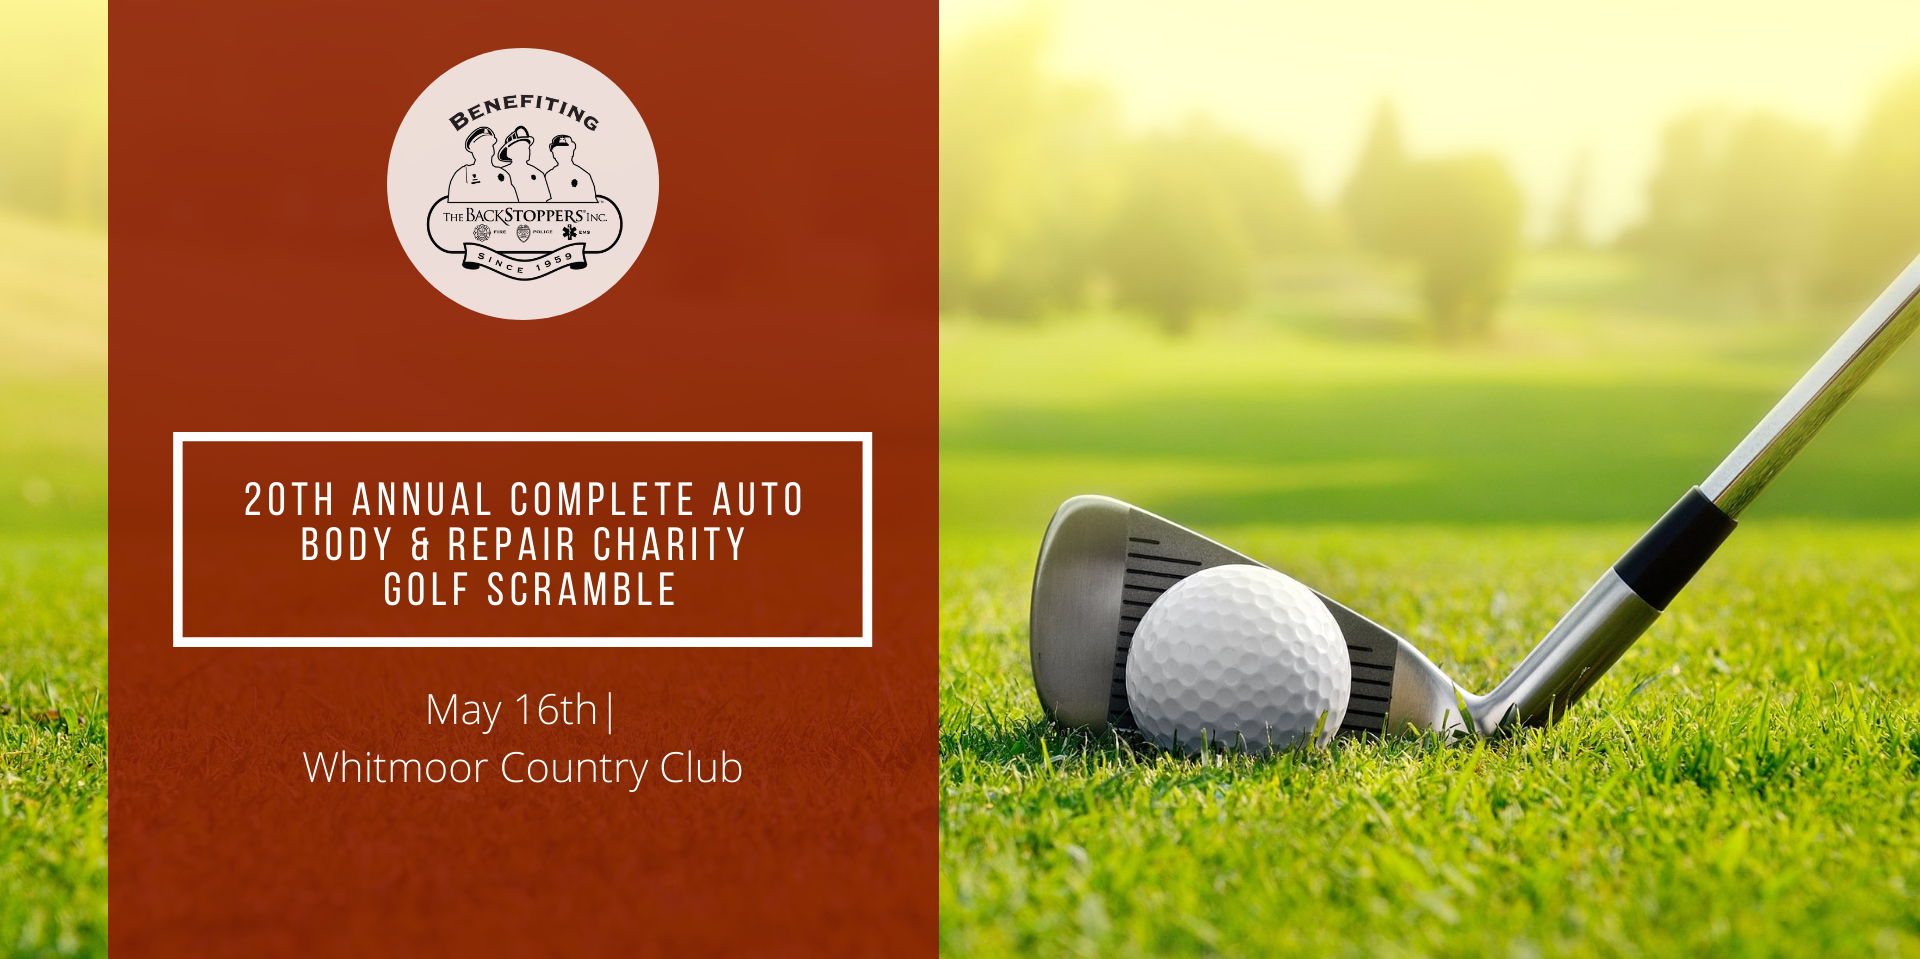 Complete Auto Body & Repair Charity Scramble promotional image